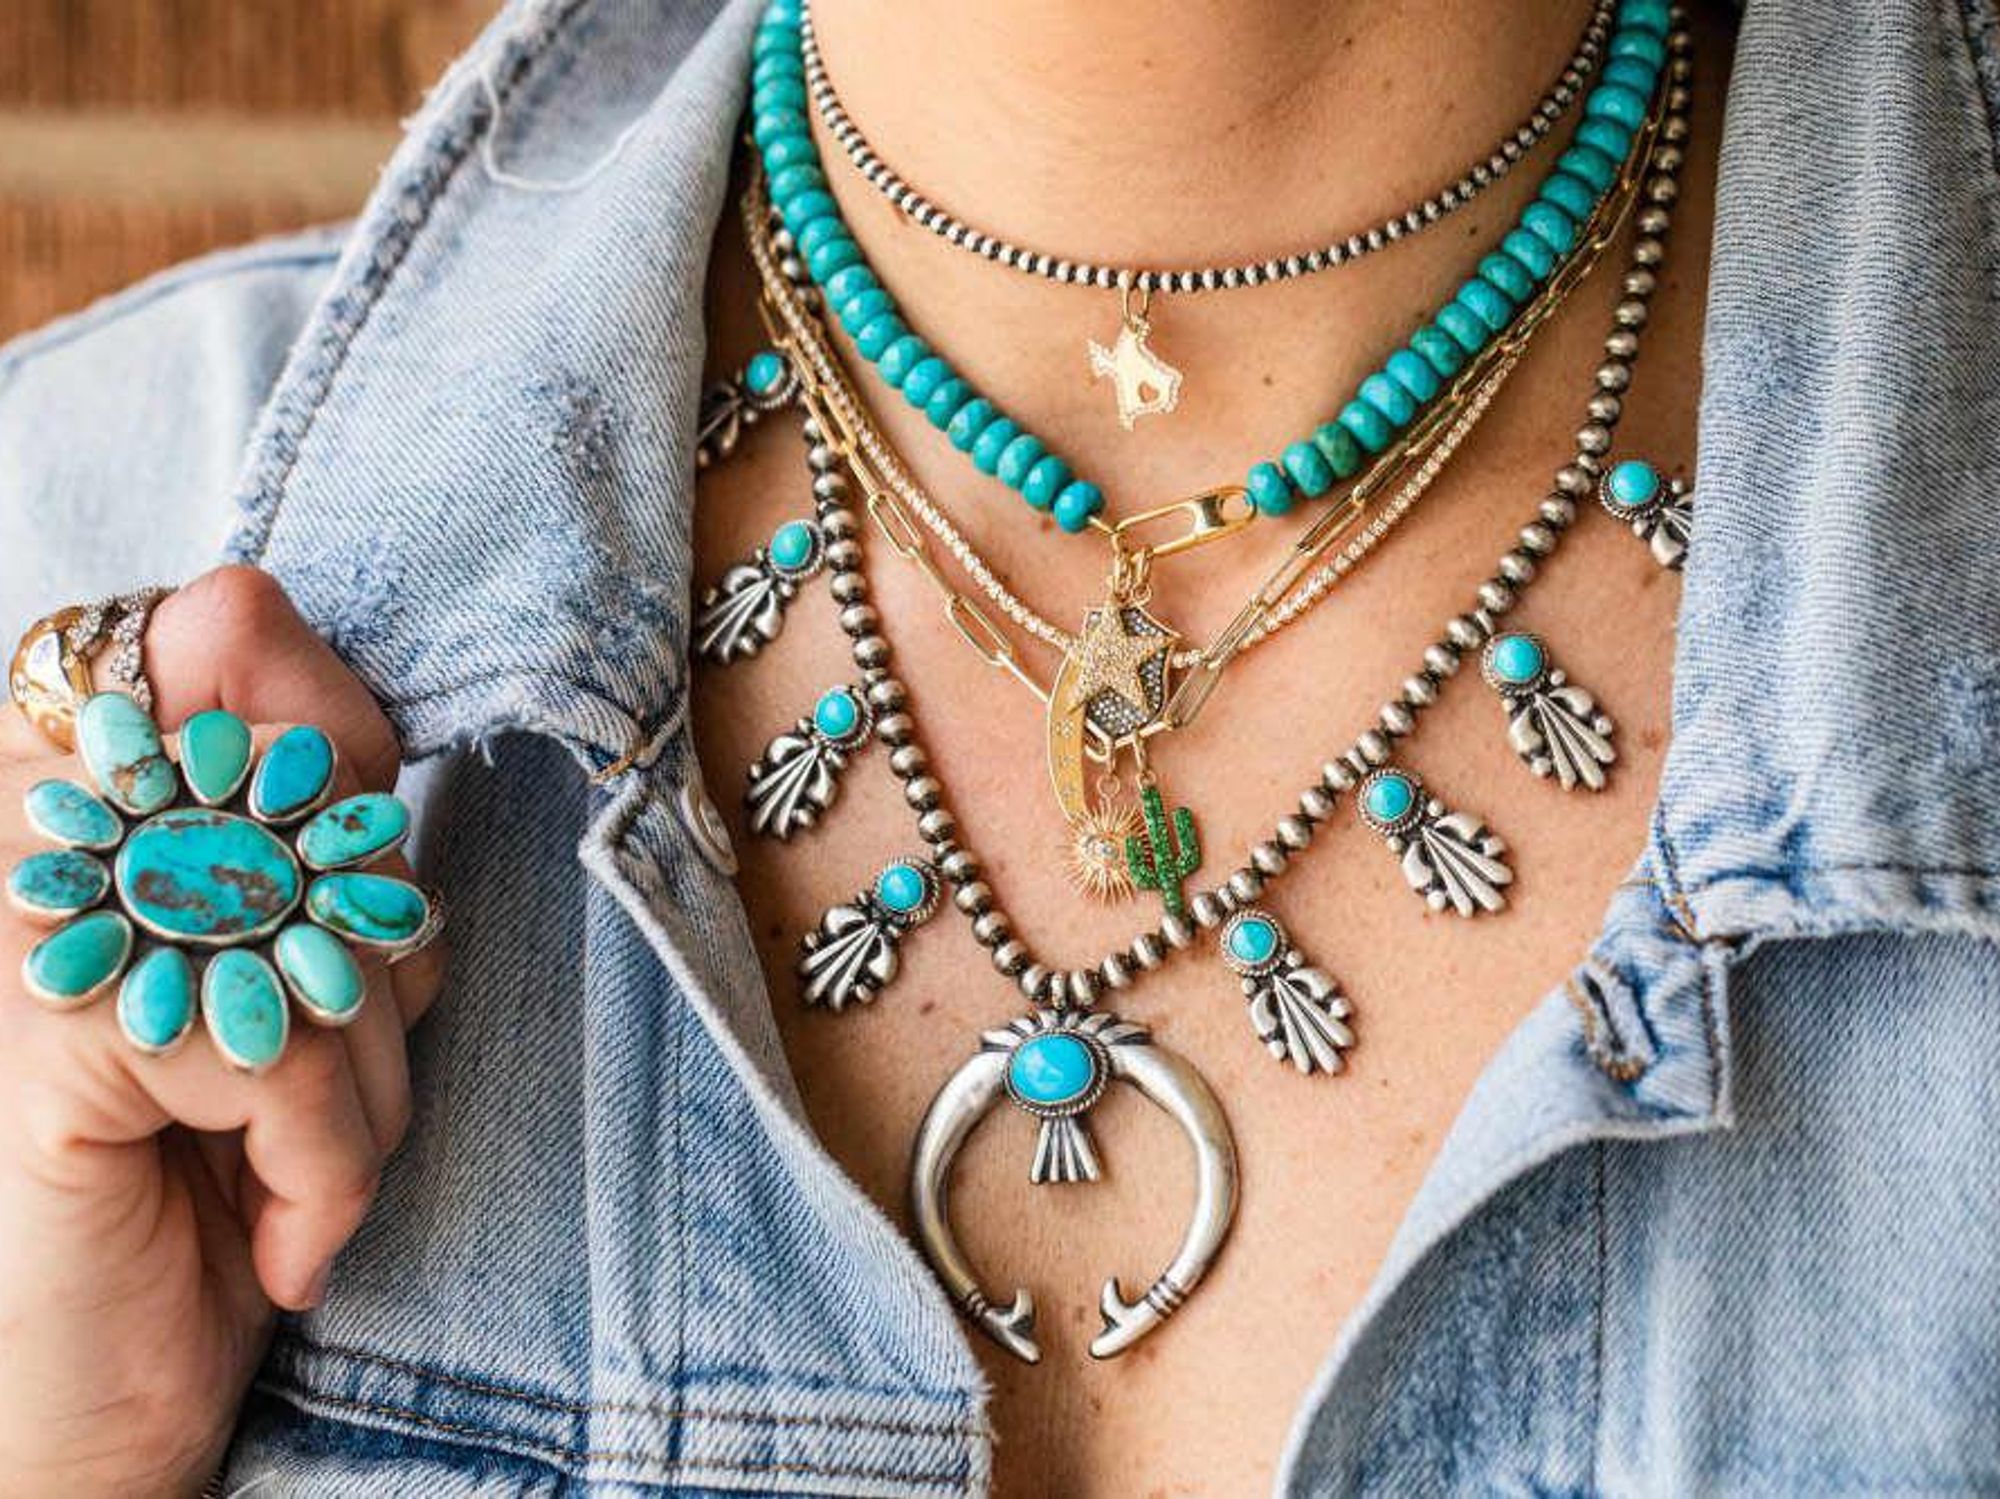 Stop by J.Landa to style your Rodeo #neckmess.